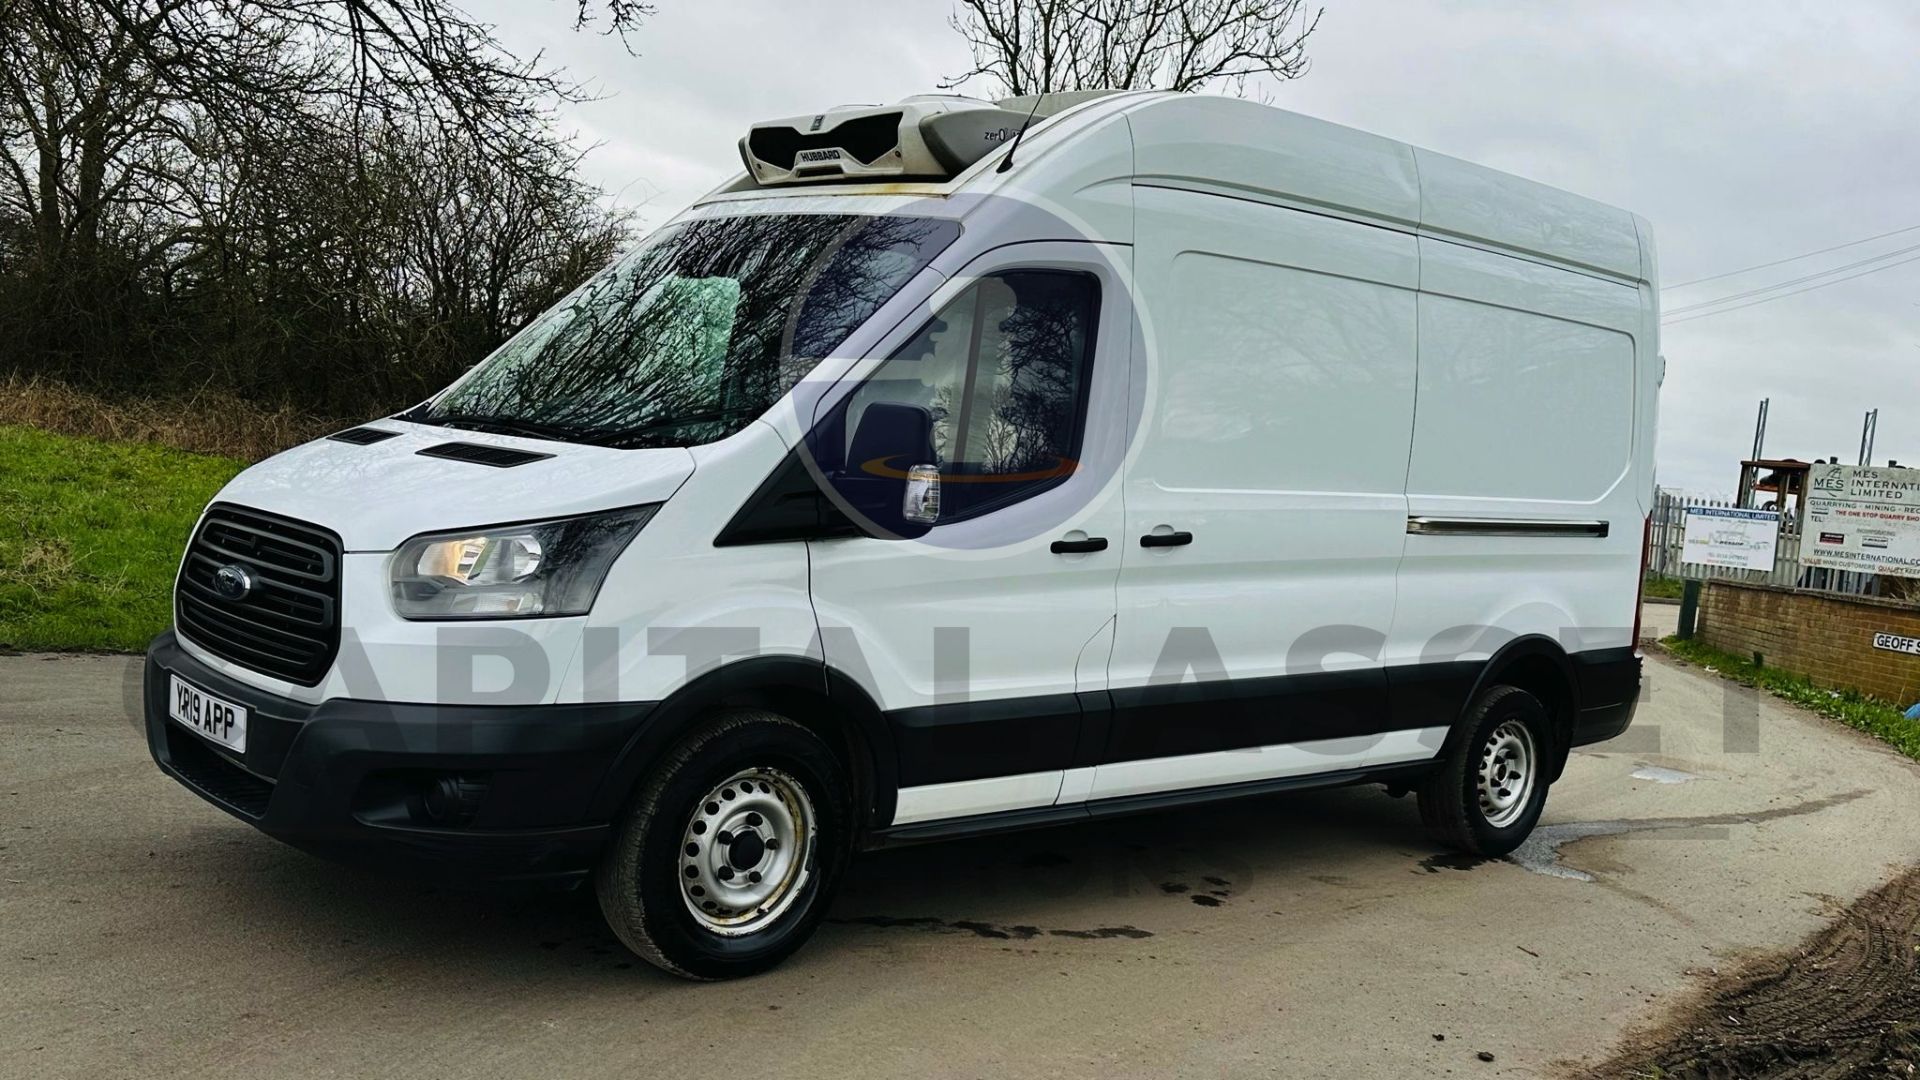 (On Sale) FORD TRANSIT 130 T350 *LWB - REFRIGERATED VAN* (2019 - EURO 6) 2.0 TDCI - 6 SPEED *EURO 6* - Image 9 of 39